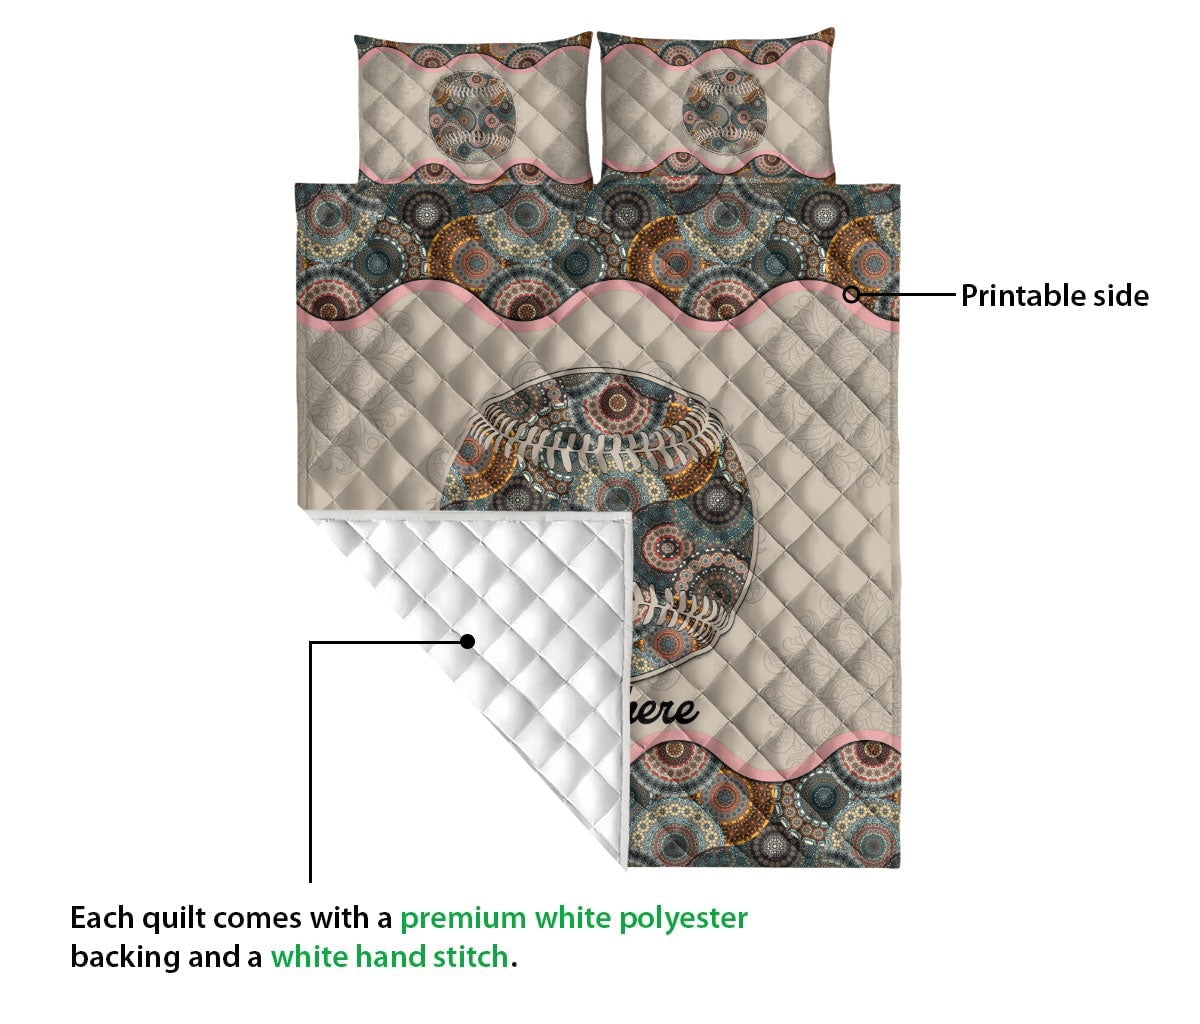 Ohaprints-Quilt-Bed-Set-Pillowcase-Softball-Baseball-Sports-Floral-Mandala-Pattern-Custom-Personalized-Name-Blanket-Bedspread-Bedding-2333-Queen (80'' x 90'')